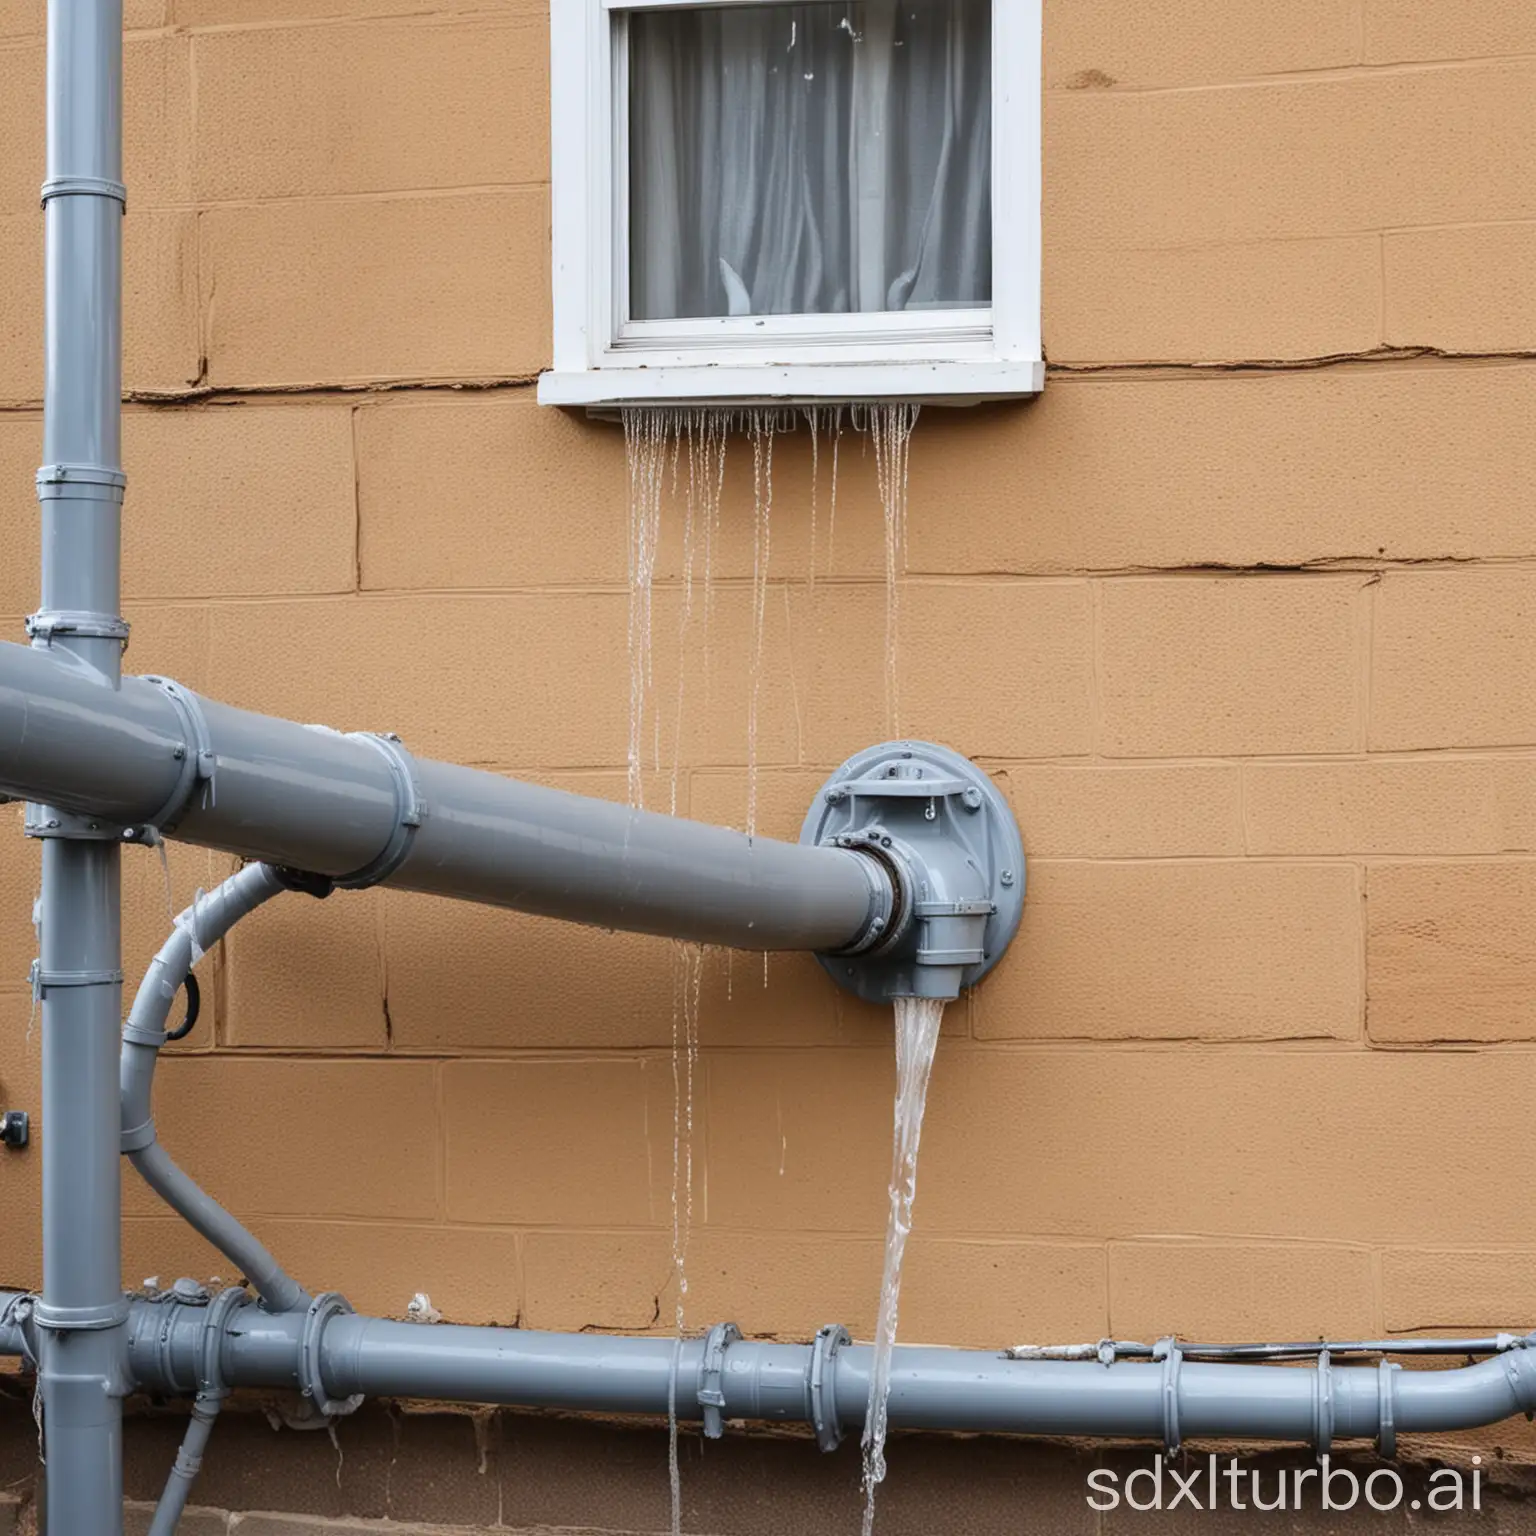 Dripping-Pipes-in-a-Leaky-House-A-Surreal-Depiction-of-Plumbing-Woes